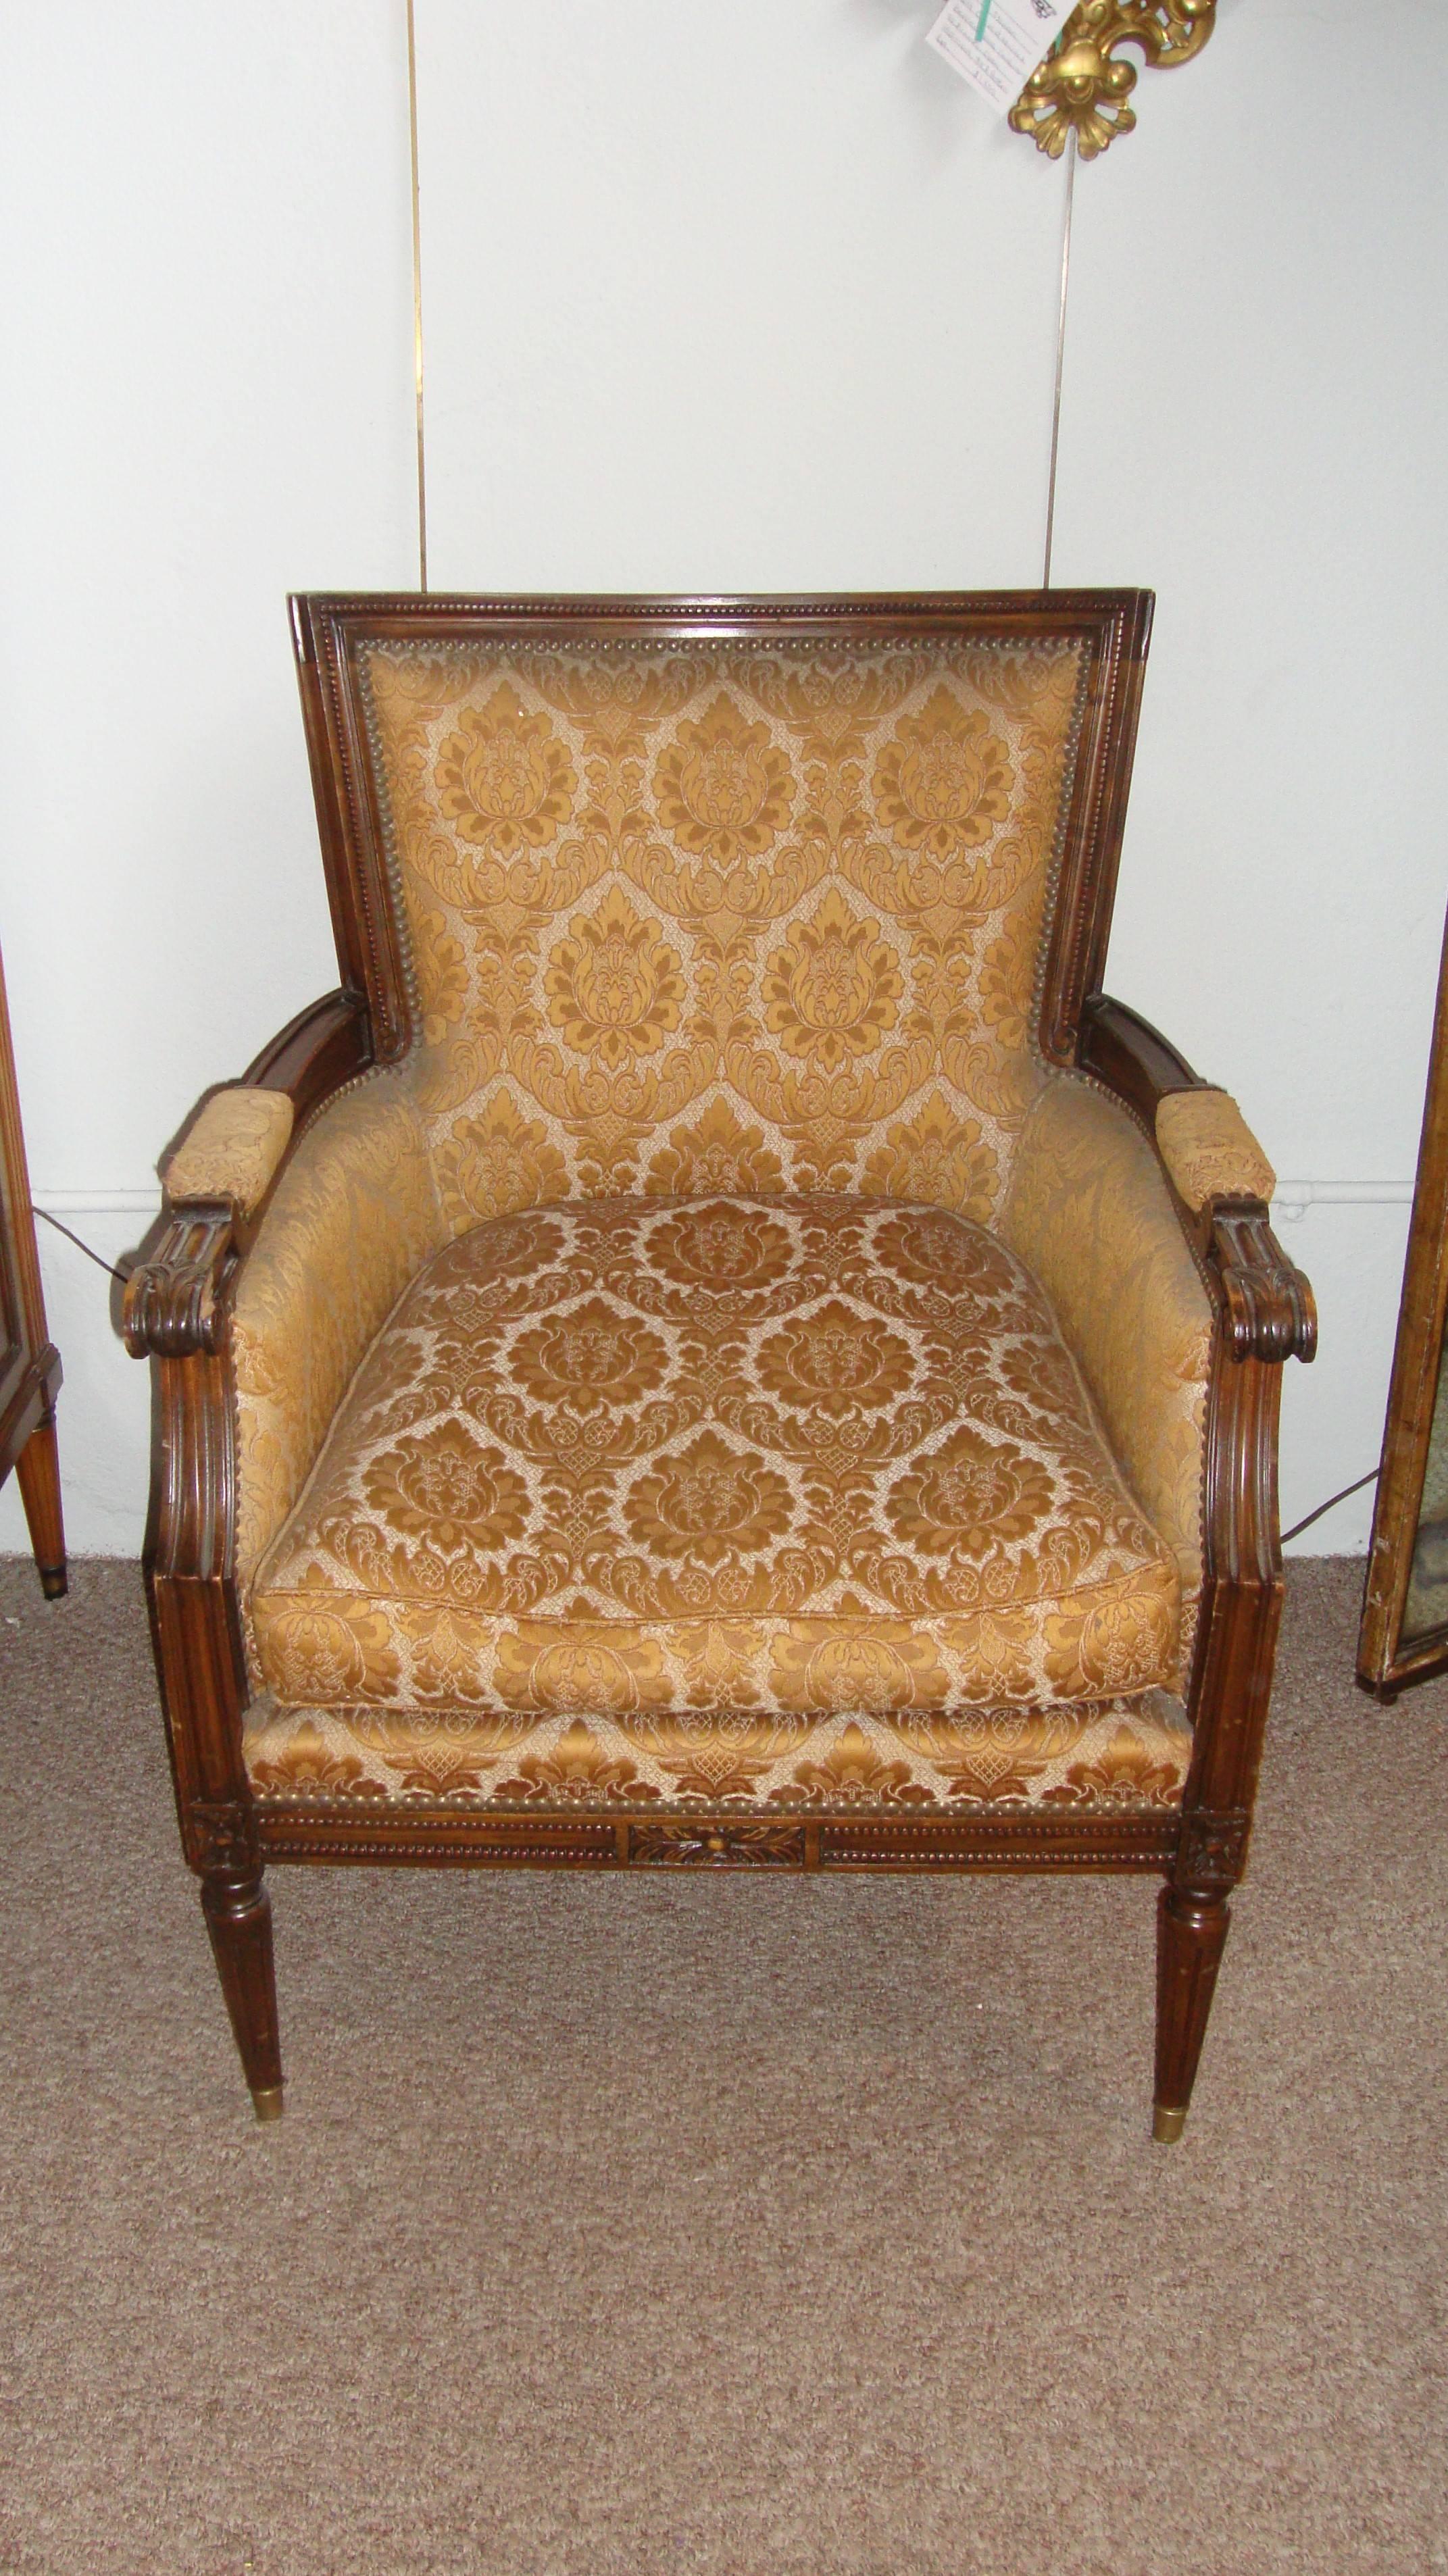 Pair Of Louis XVI Style Bergere Arm Office Chairs Manner Of Jansen with brass cap feet, floral motif fabric.
 
Made in France this pair having strong sturdy frames in the Louis XVI Fashion. Each with a wide broad C shaped back, the pair have